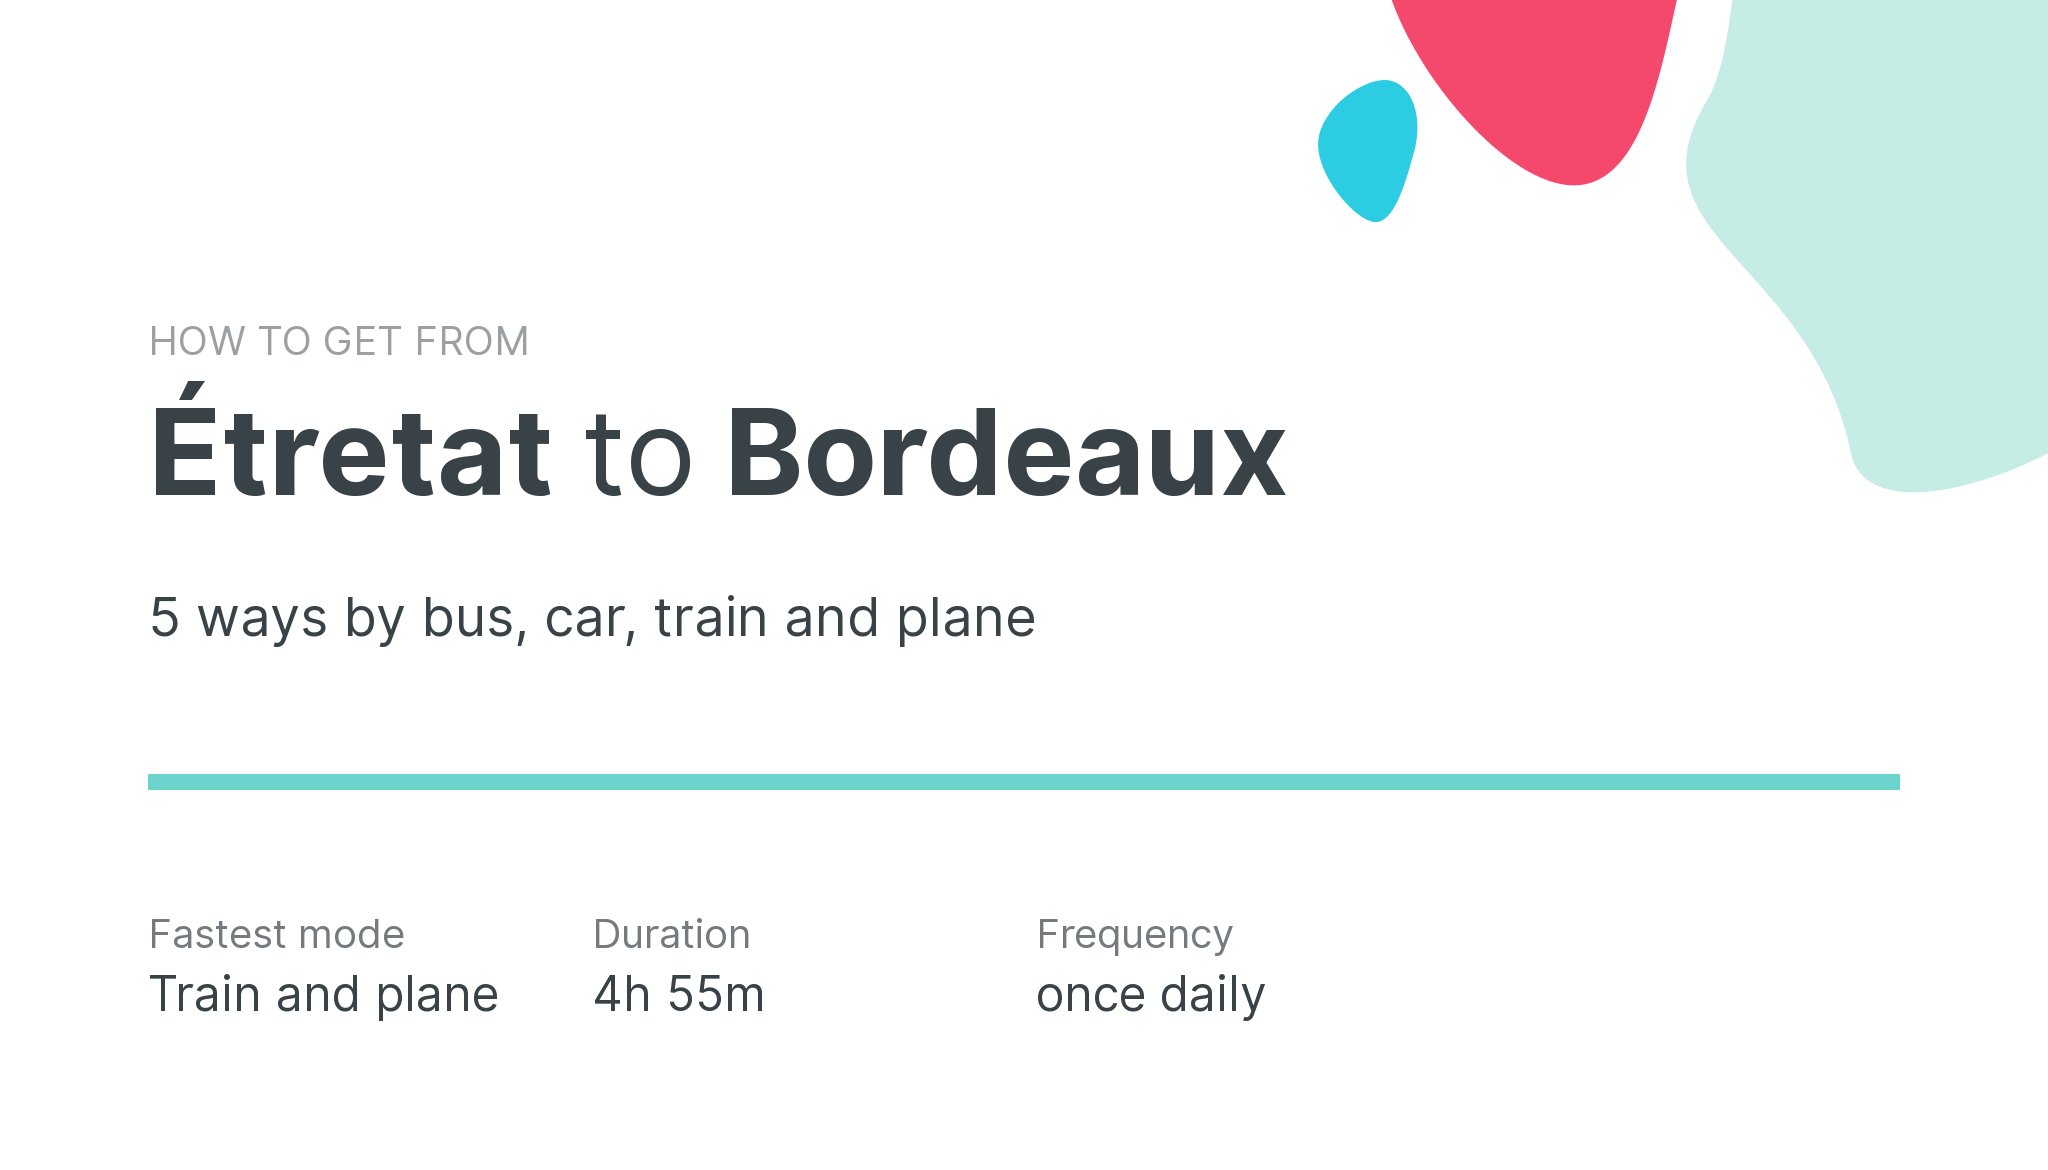 How do I get from Étretat to Bordeaux